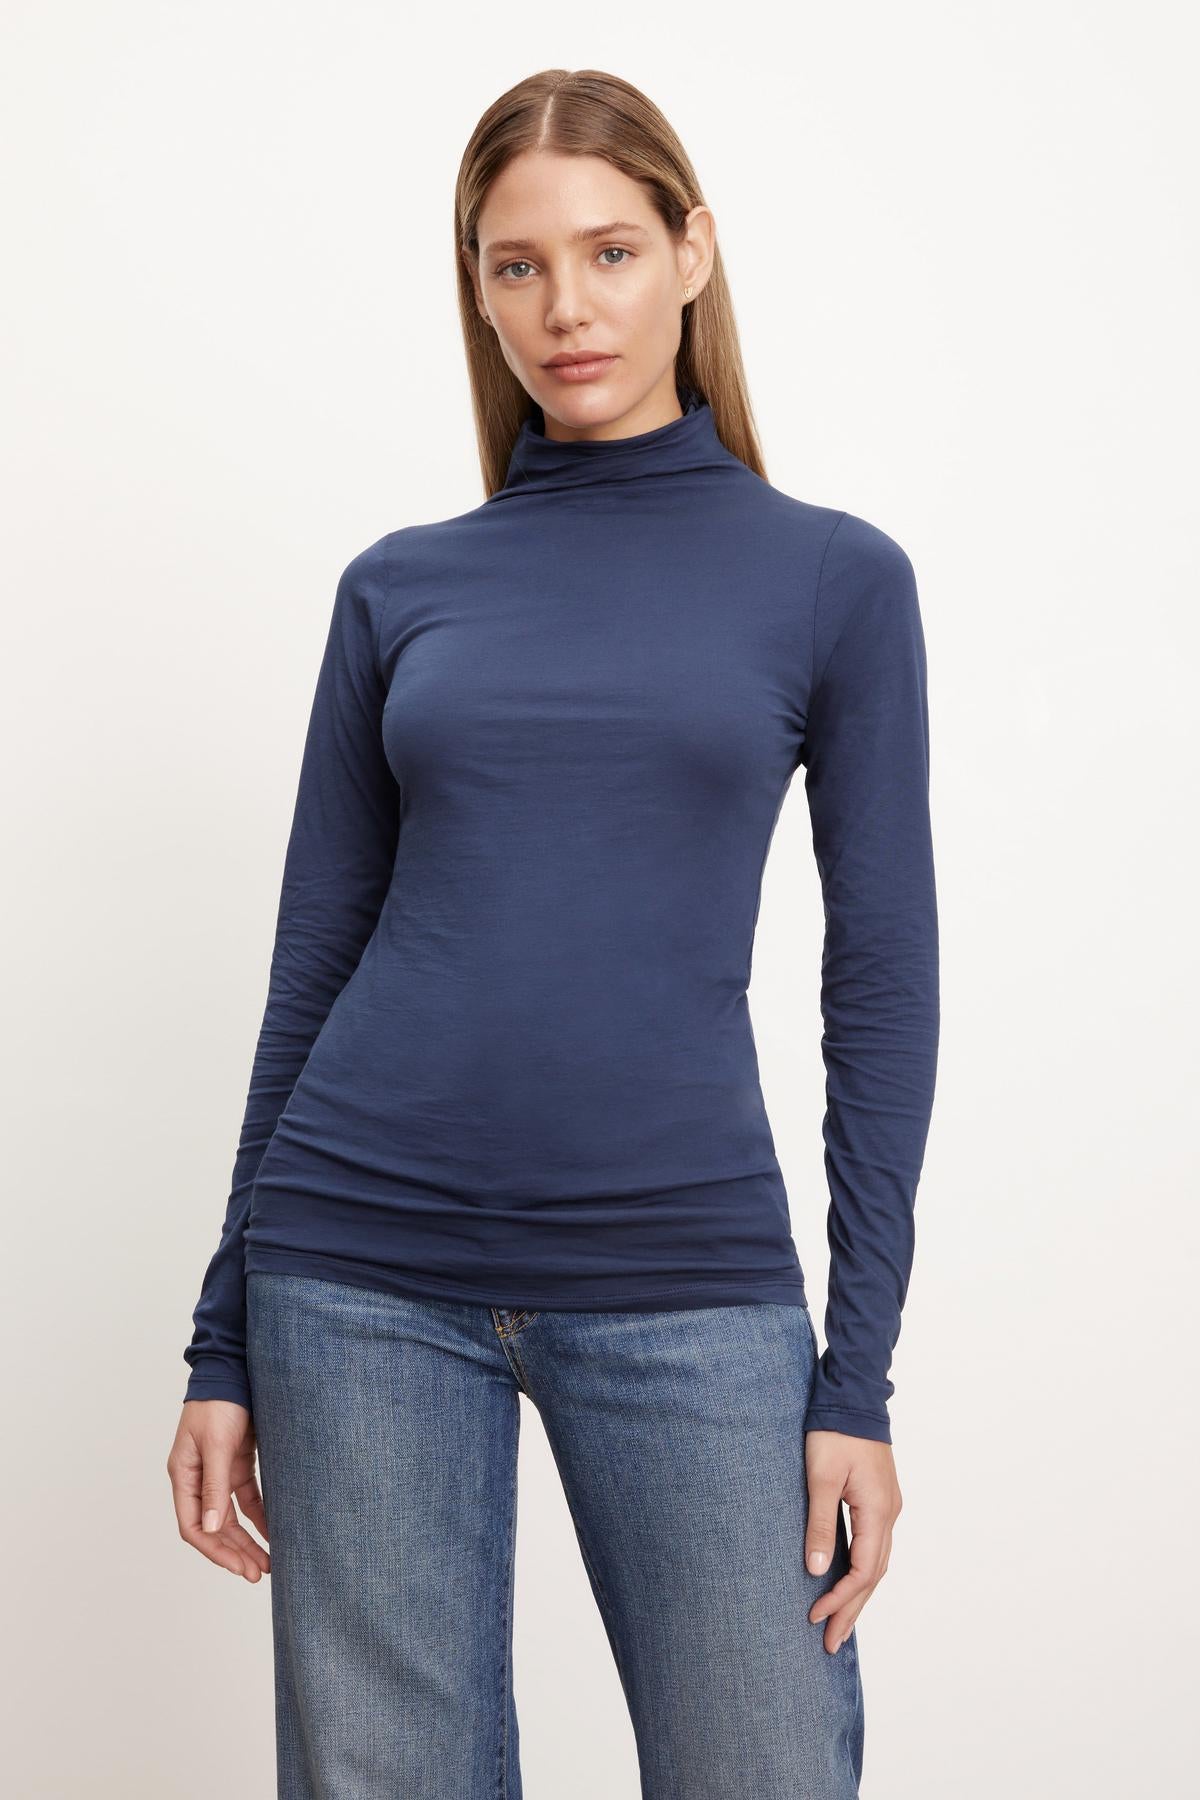 A woman showcasing a fashion-forward TALISIA GAUZY WHISPER FITTED MOCK NECK TEE by Velvet by Graham & Spencer, paired effortlessly with comfortable jeans - a perfect wardrobe staple.-26895431729345